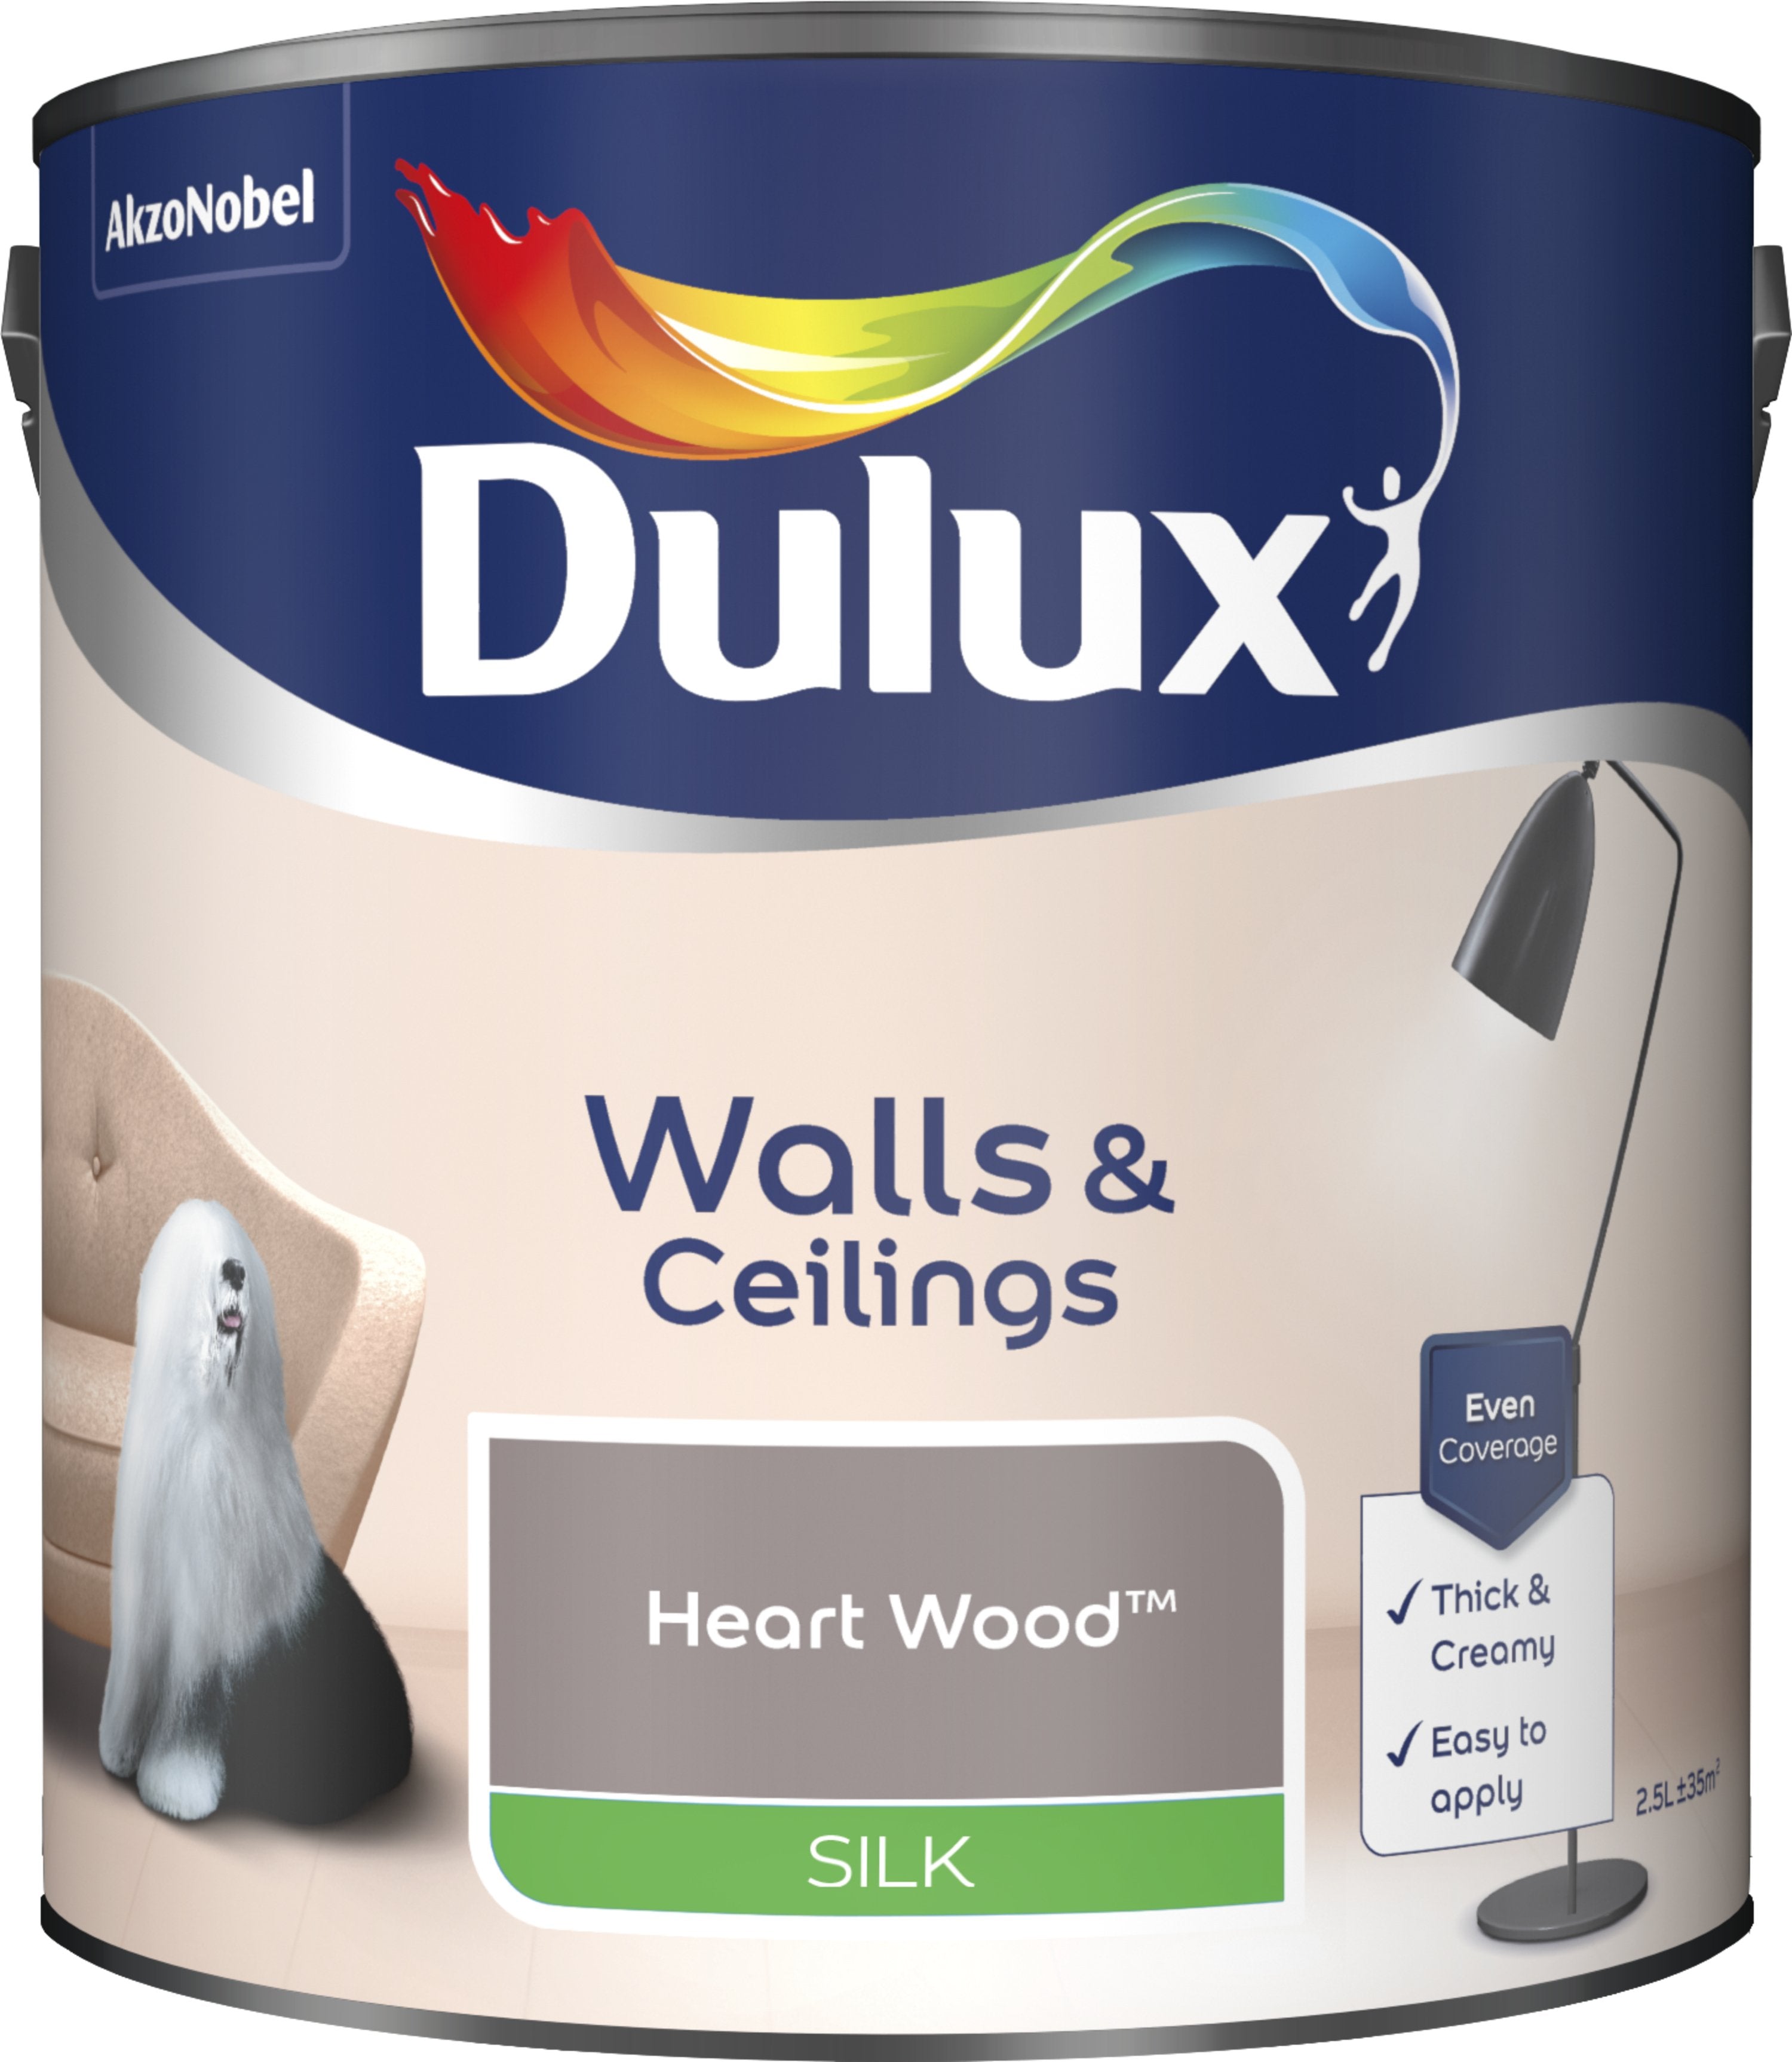 Dulux Silk Emulsion Paint For Walls And Ceilings - Heart Wood 2.5L Garden & Diy  Home Improvements  